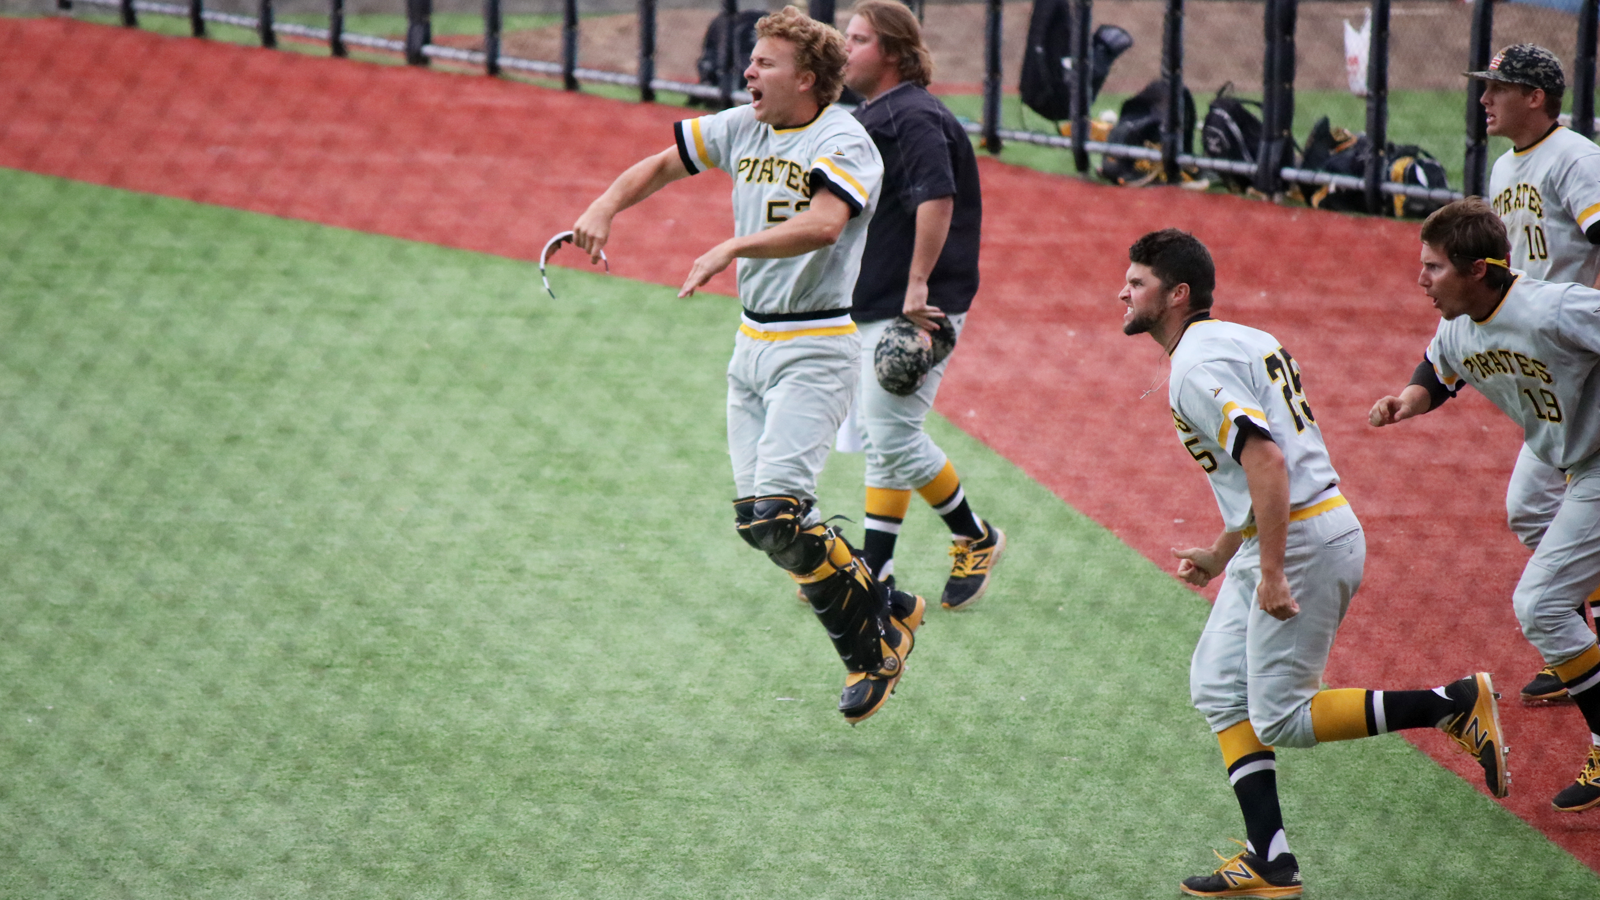 Pirates hold off Texas Lutheran, advance in elimination game